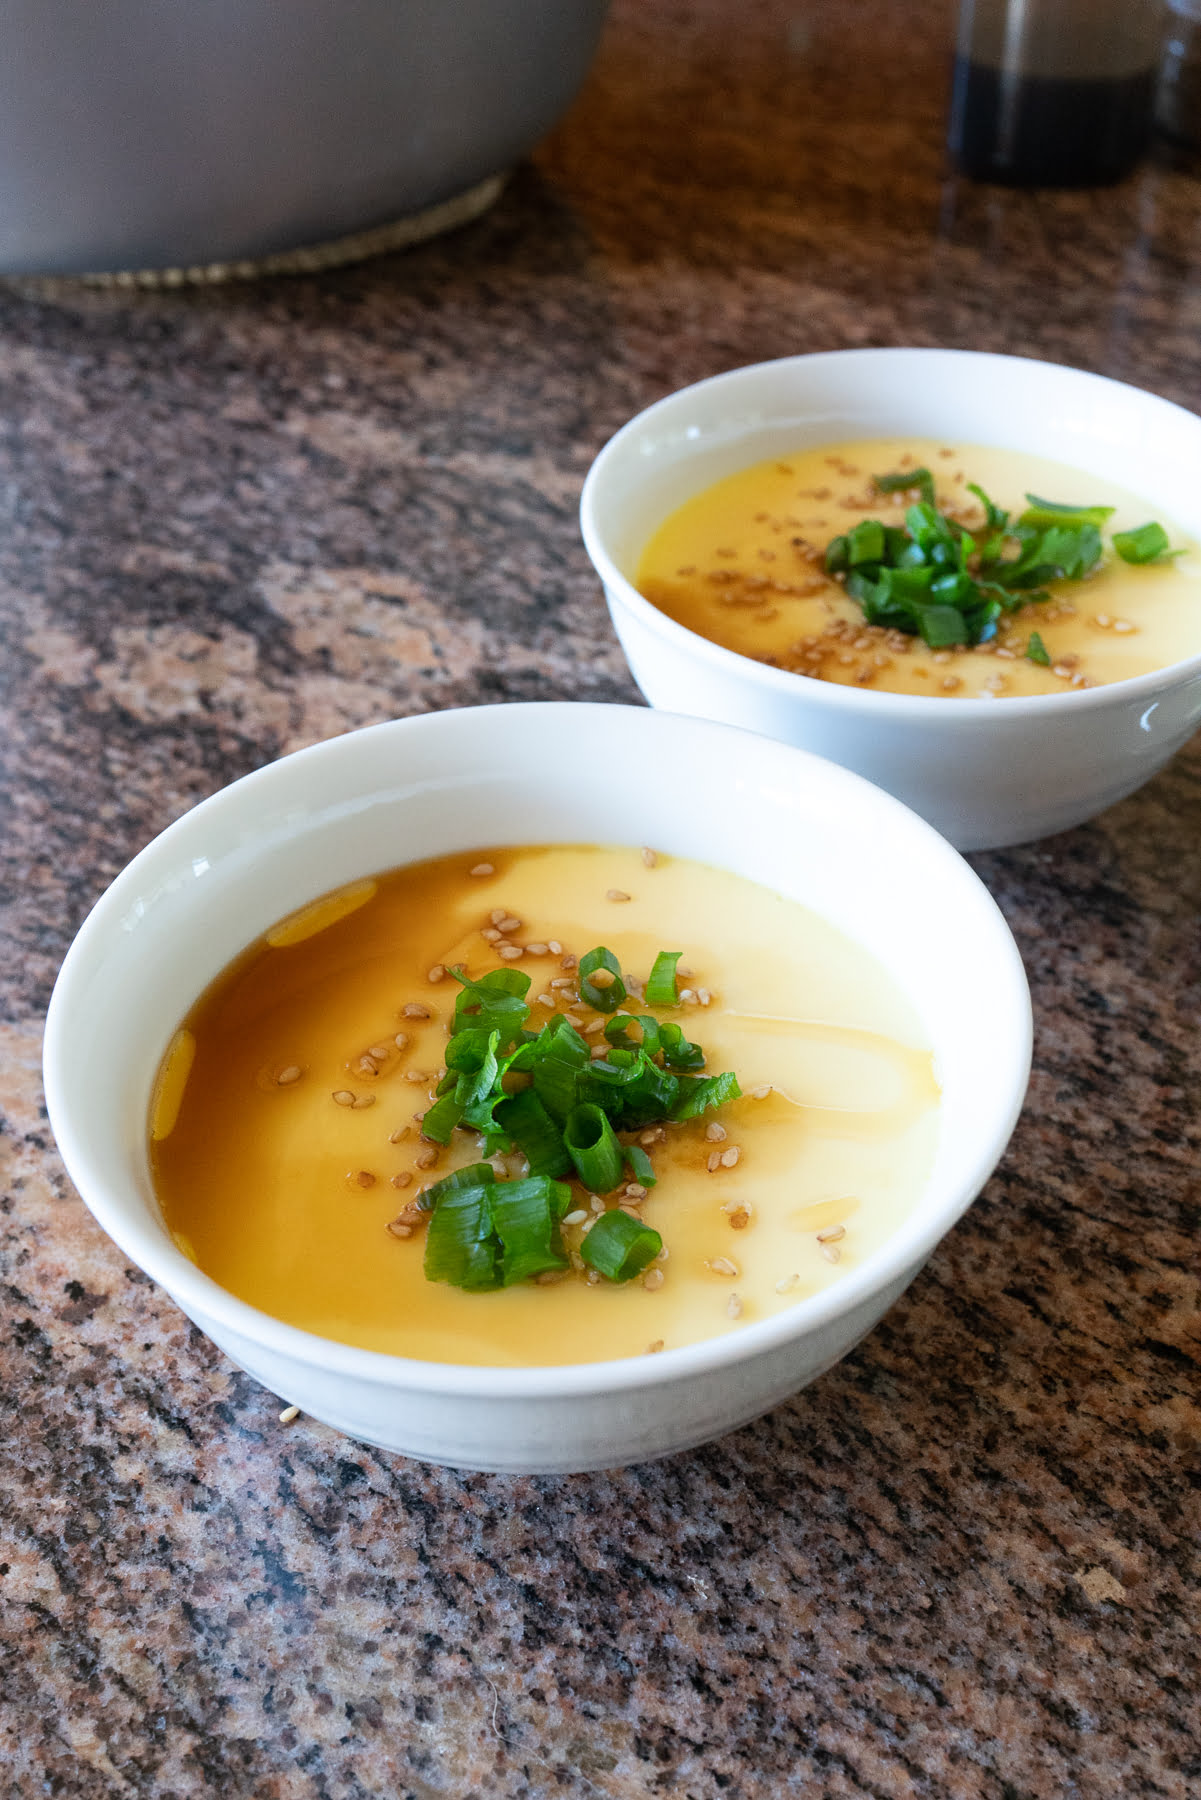 Two servings of Chinese Steamed Egg, ready to eat.